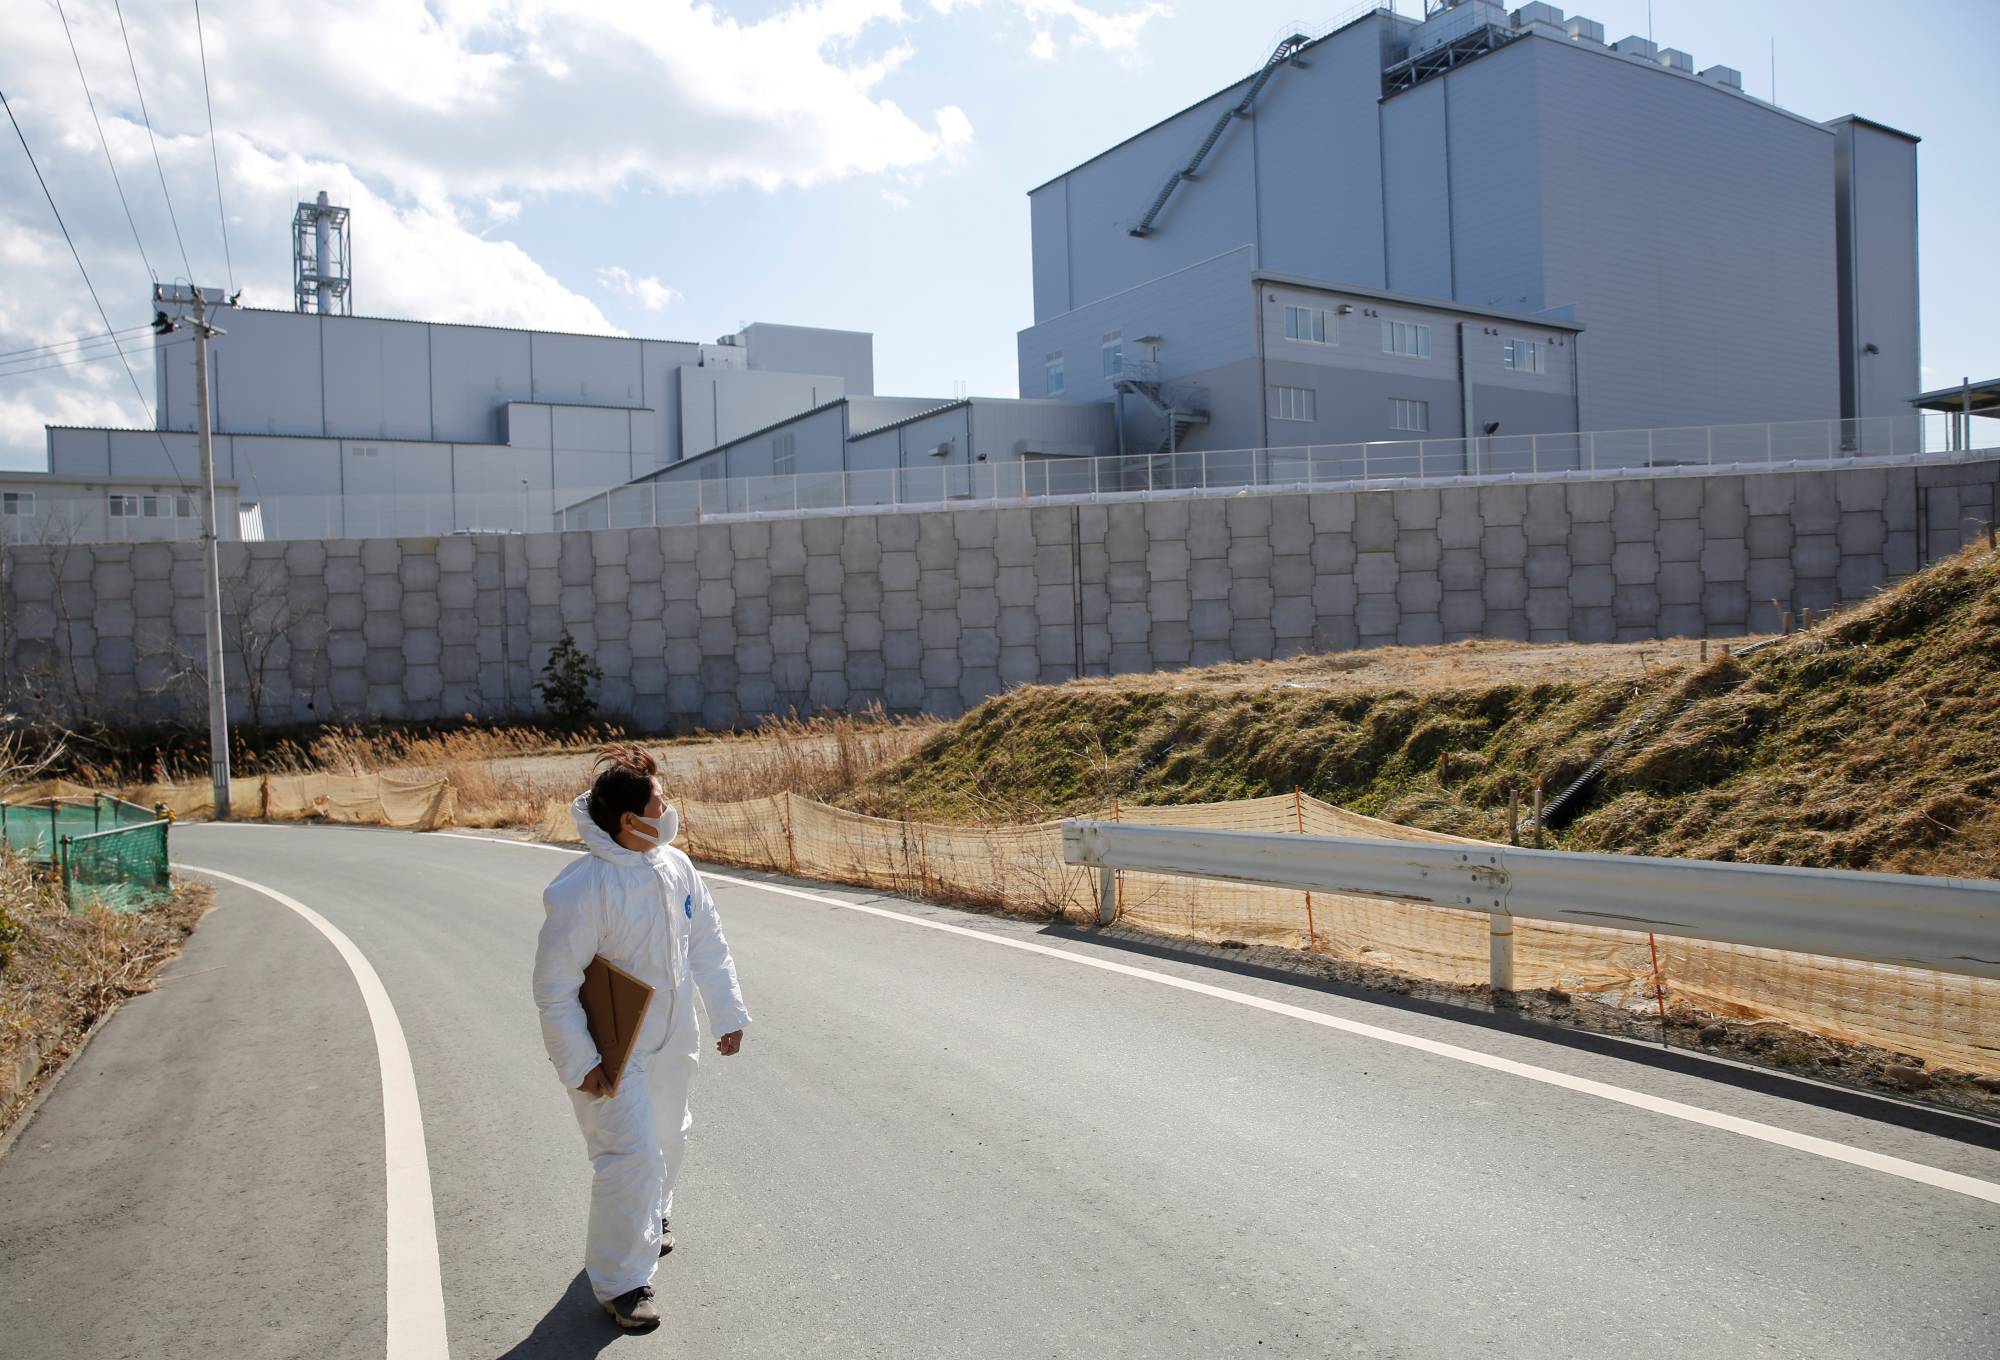 Hisae Unuma wears a protective suit as she walks past an incinerator which was built in a rural village near her collapsing home, where she lived before being evacuated. | REUTERS